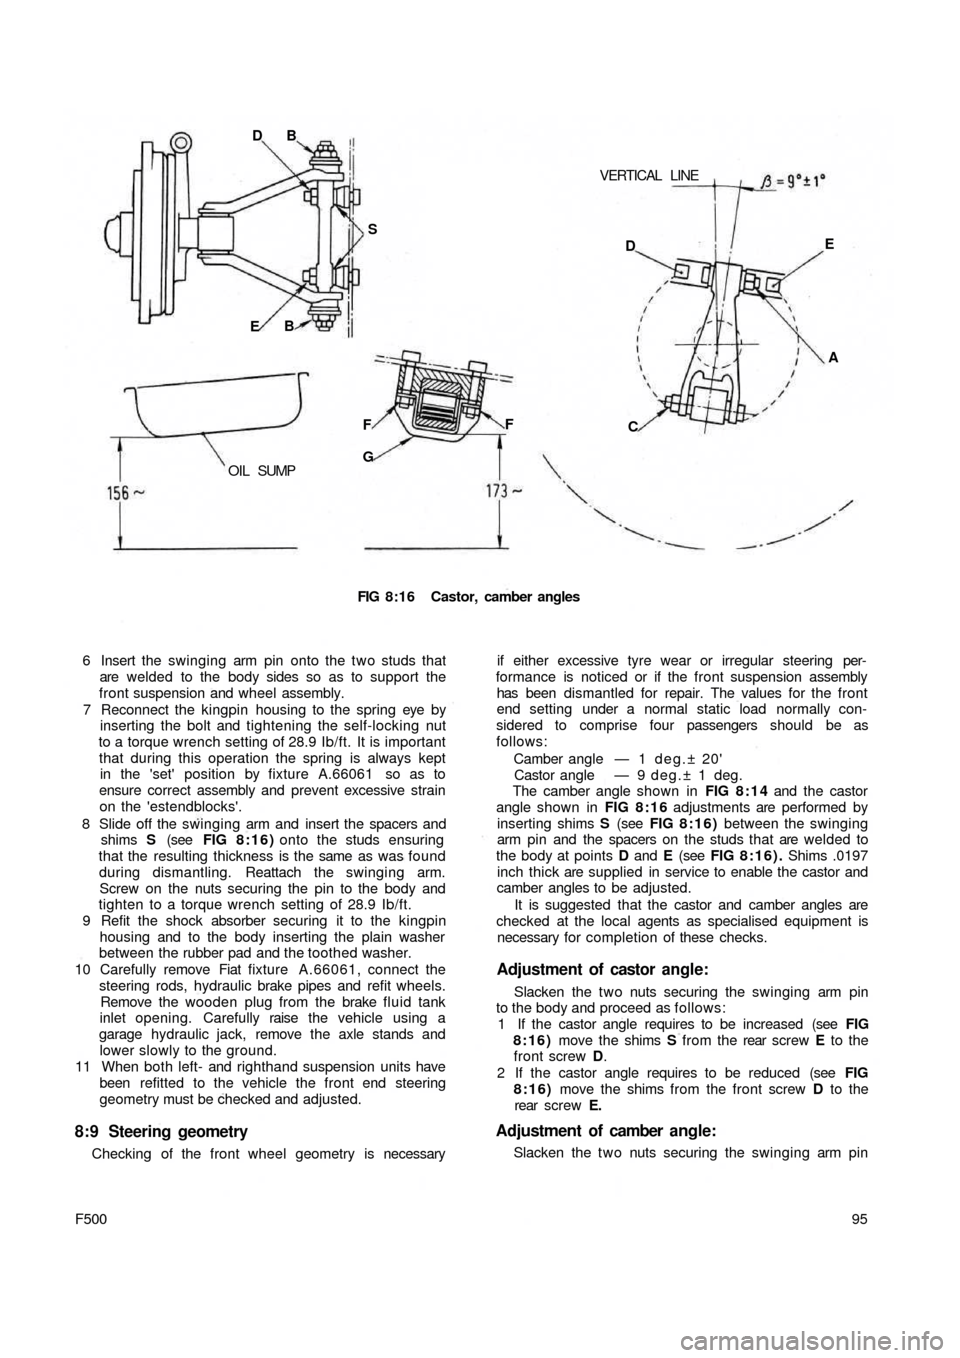 FIAT 500 1959 1.G Workshop Manual VERTICAL  LINE DB
S
EB
OIL  SUMPF
GF
FIG 8:16 Castor, camber angles
6 Insert the swinging arm pin onto the two studs that
are welded  to the  body sides so as to support the
front suspension and wheel